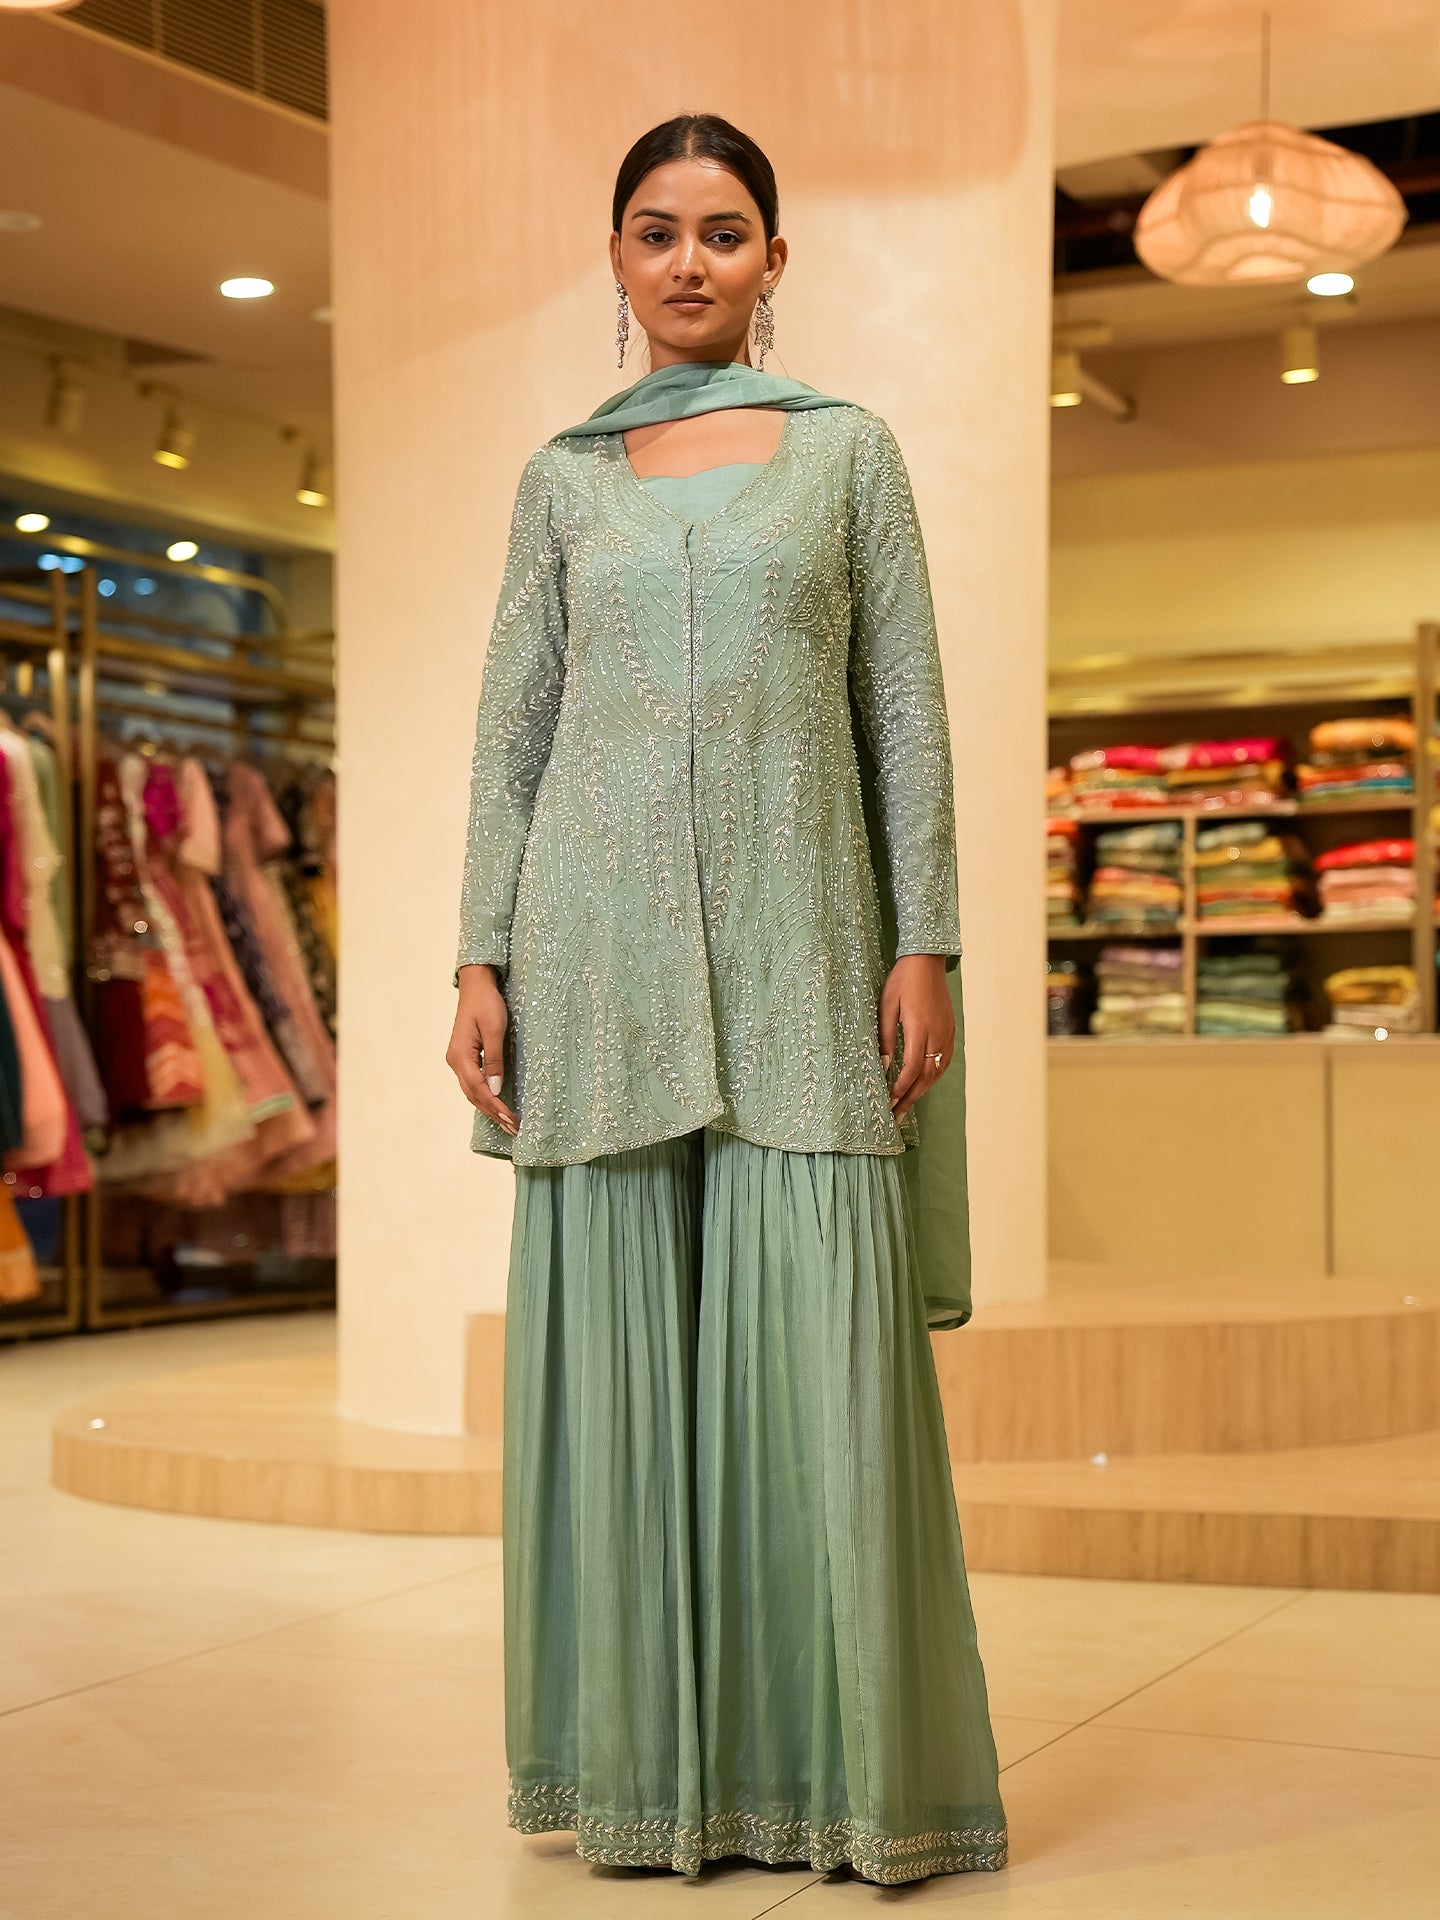 Elevate your style with our exquisite handcrafted outfit